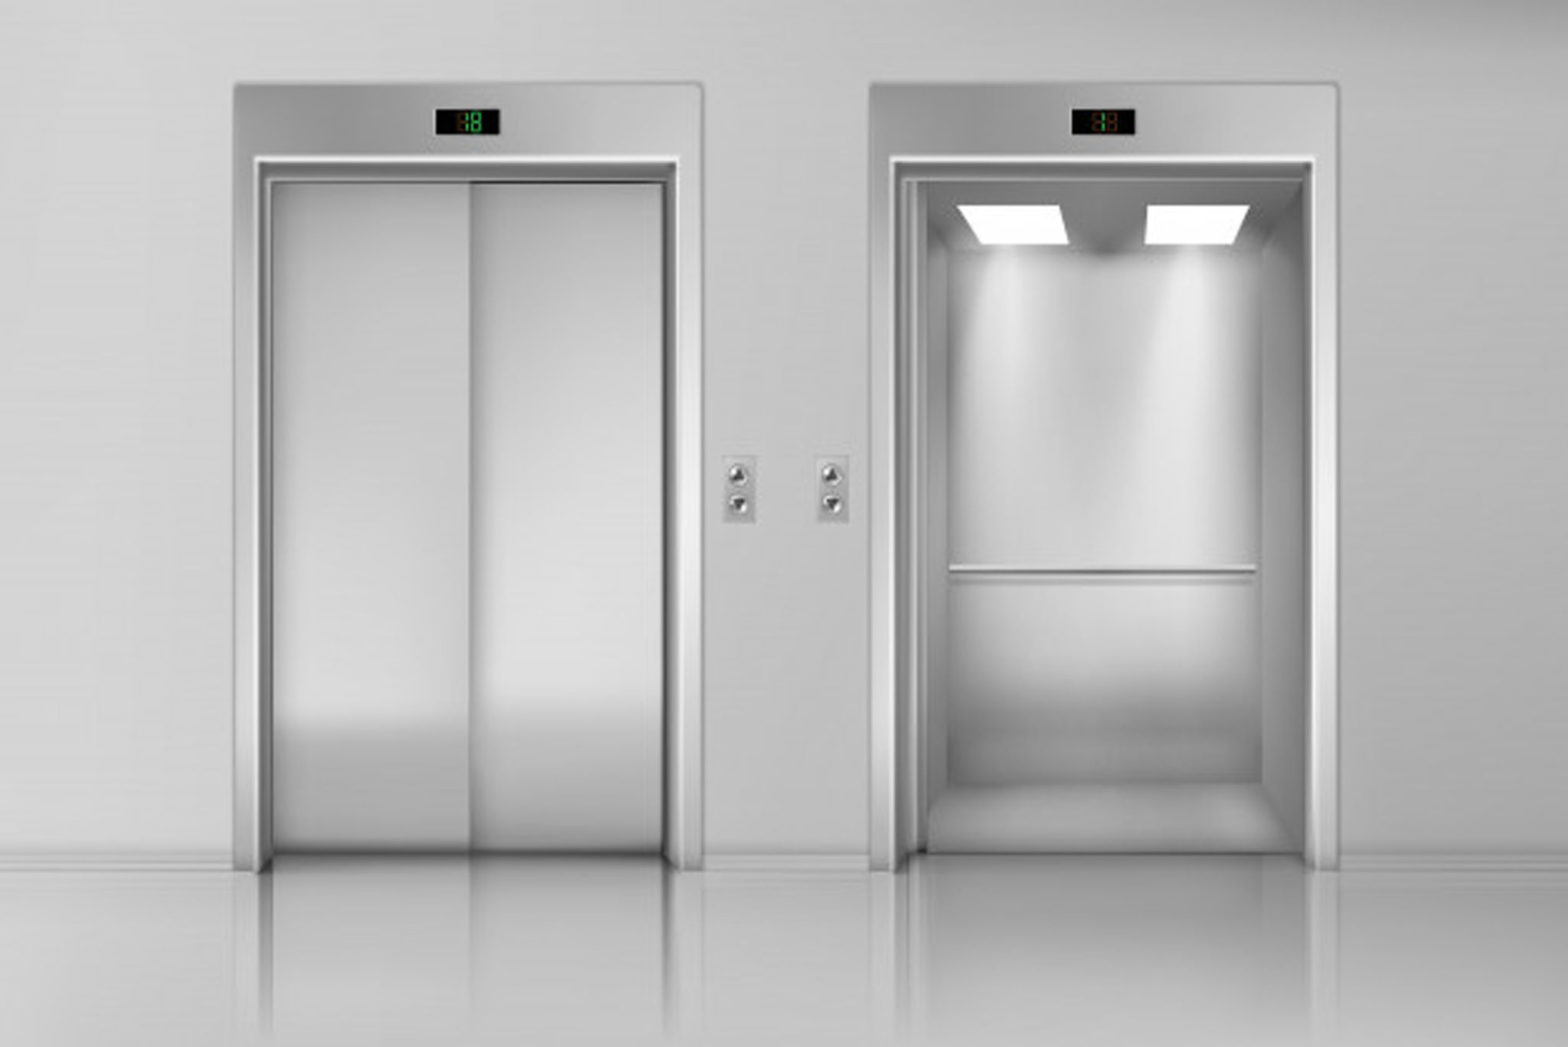 Smart Elevator Technologies for an Even Smarter Elevator Experience